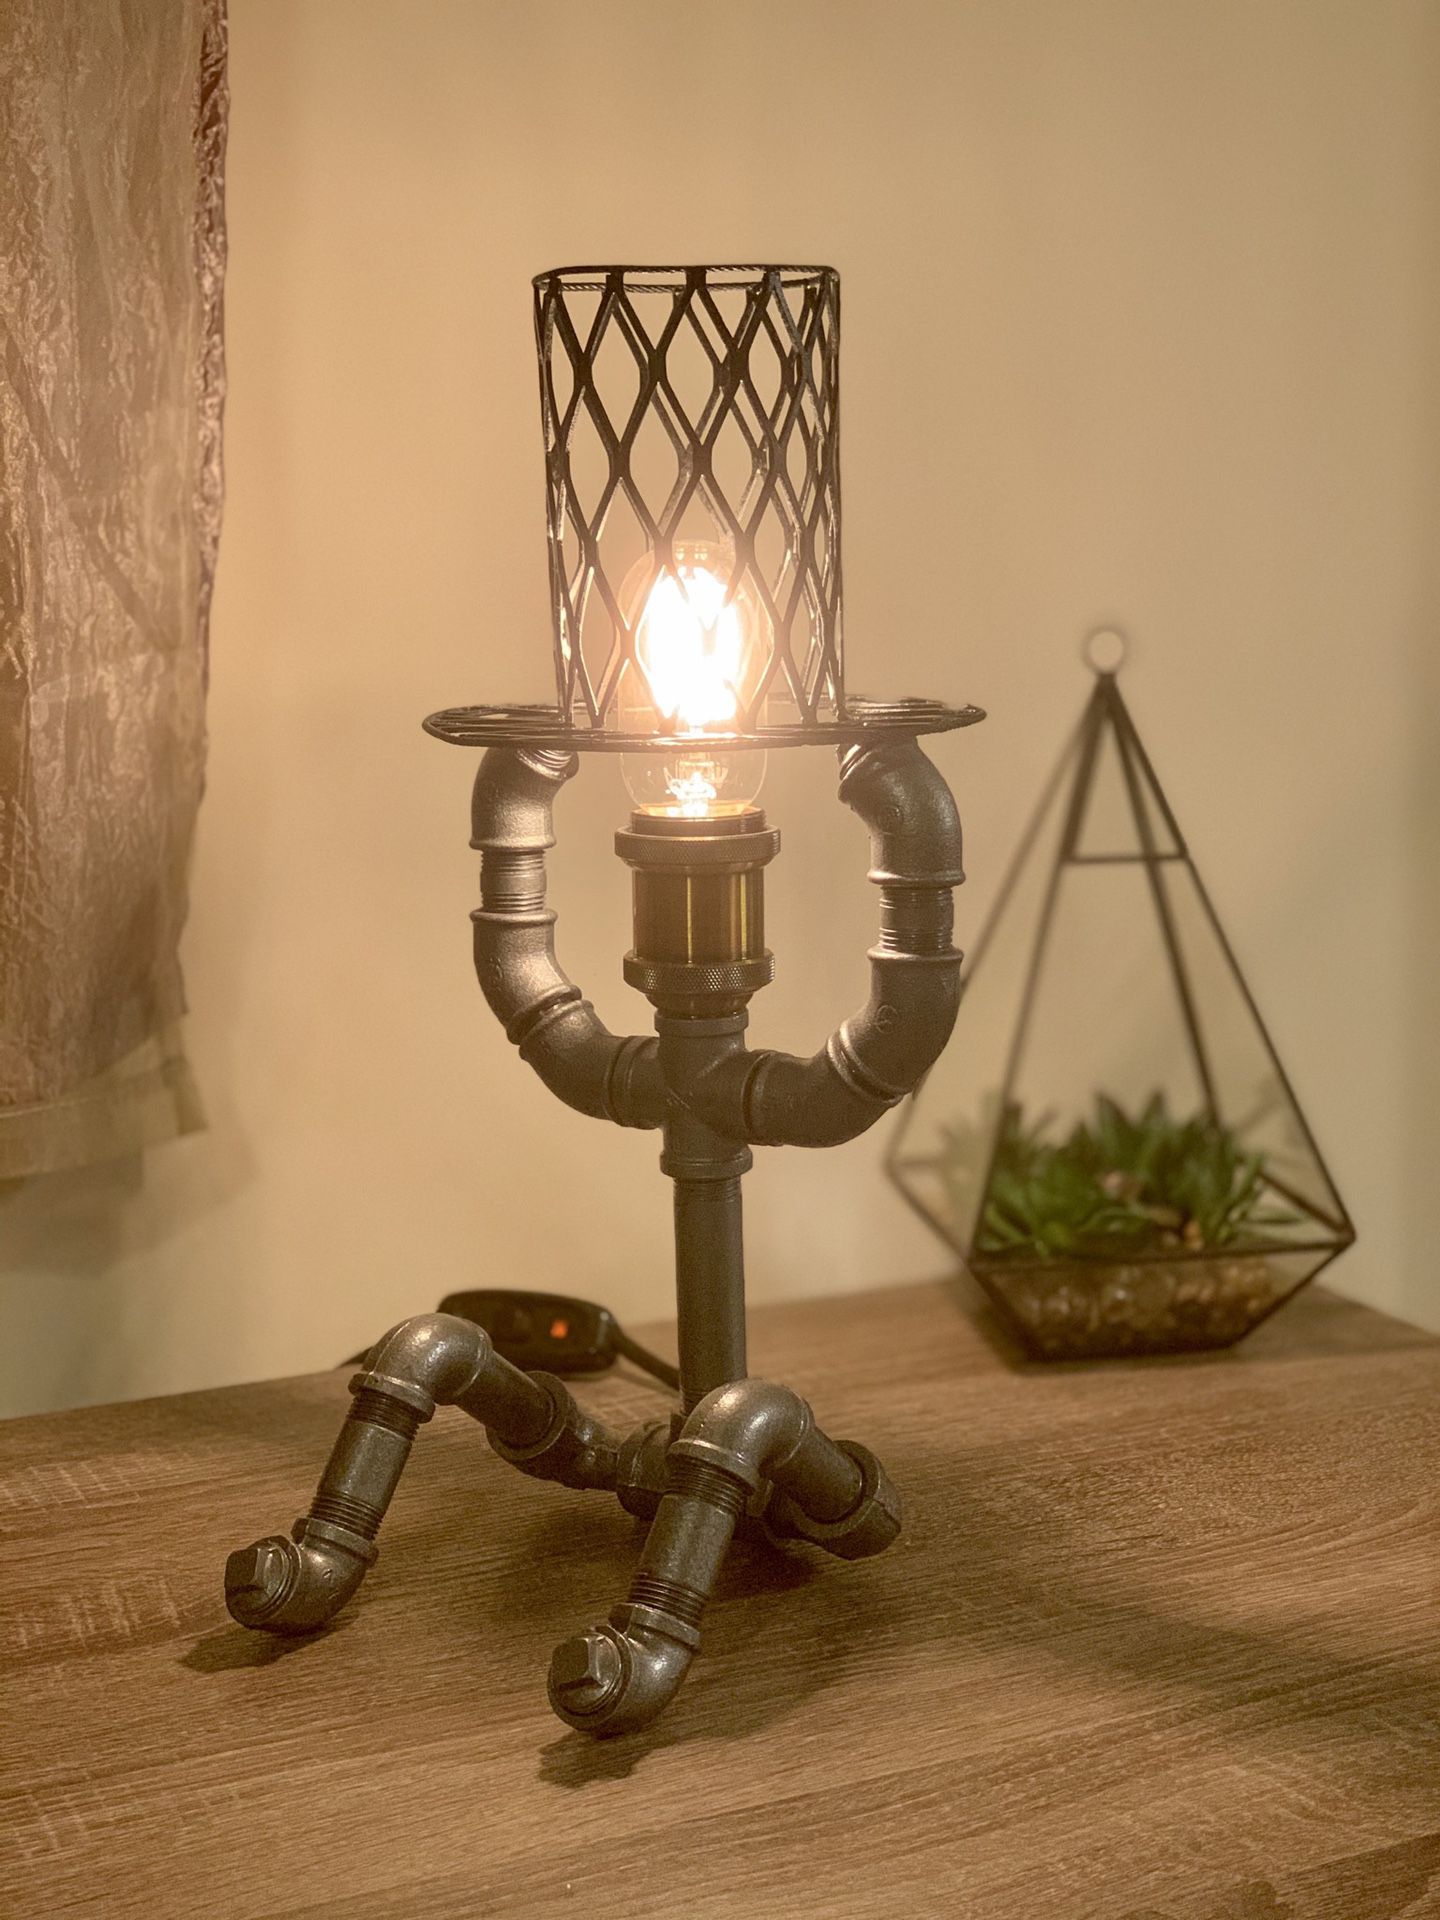 Handmade Steampunk Man With a Hat Table/Desk Lamp